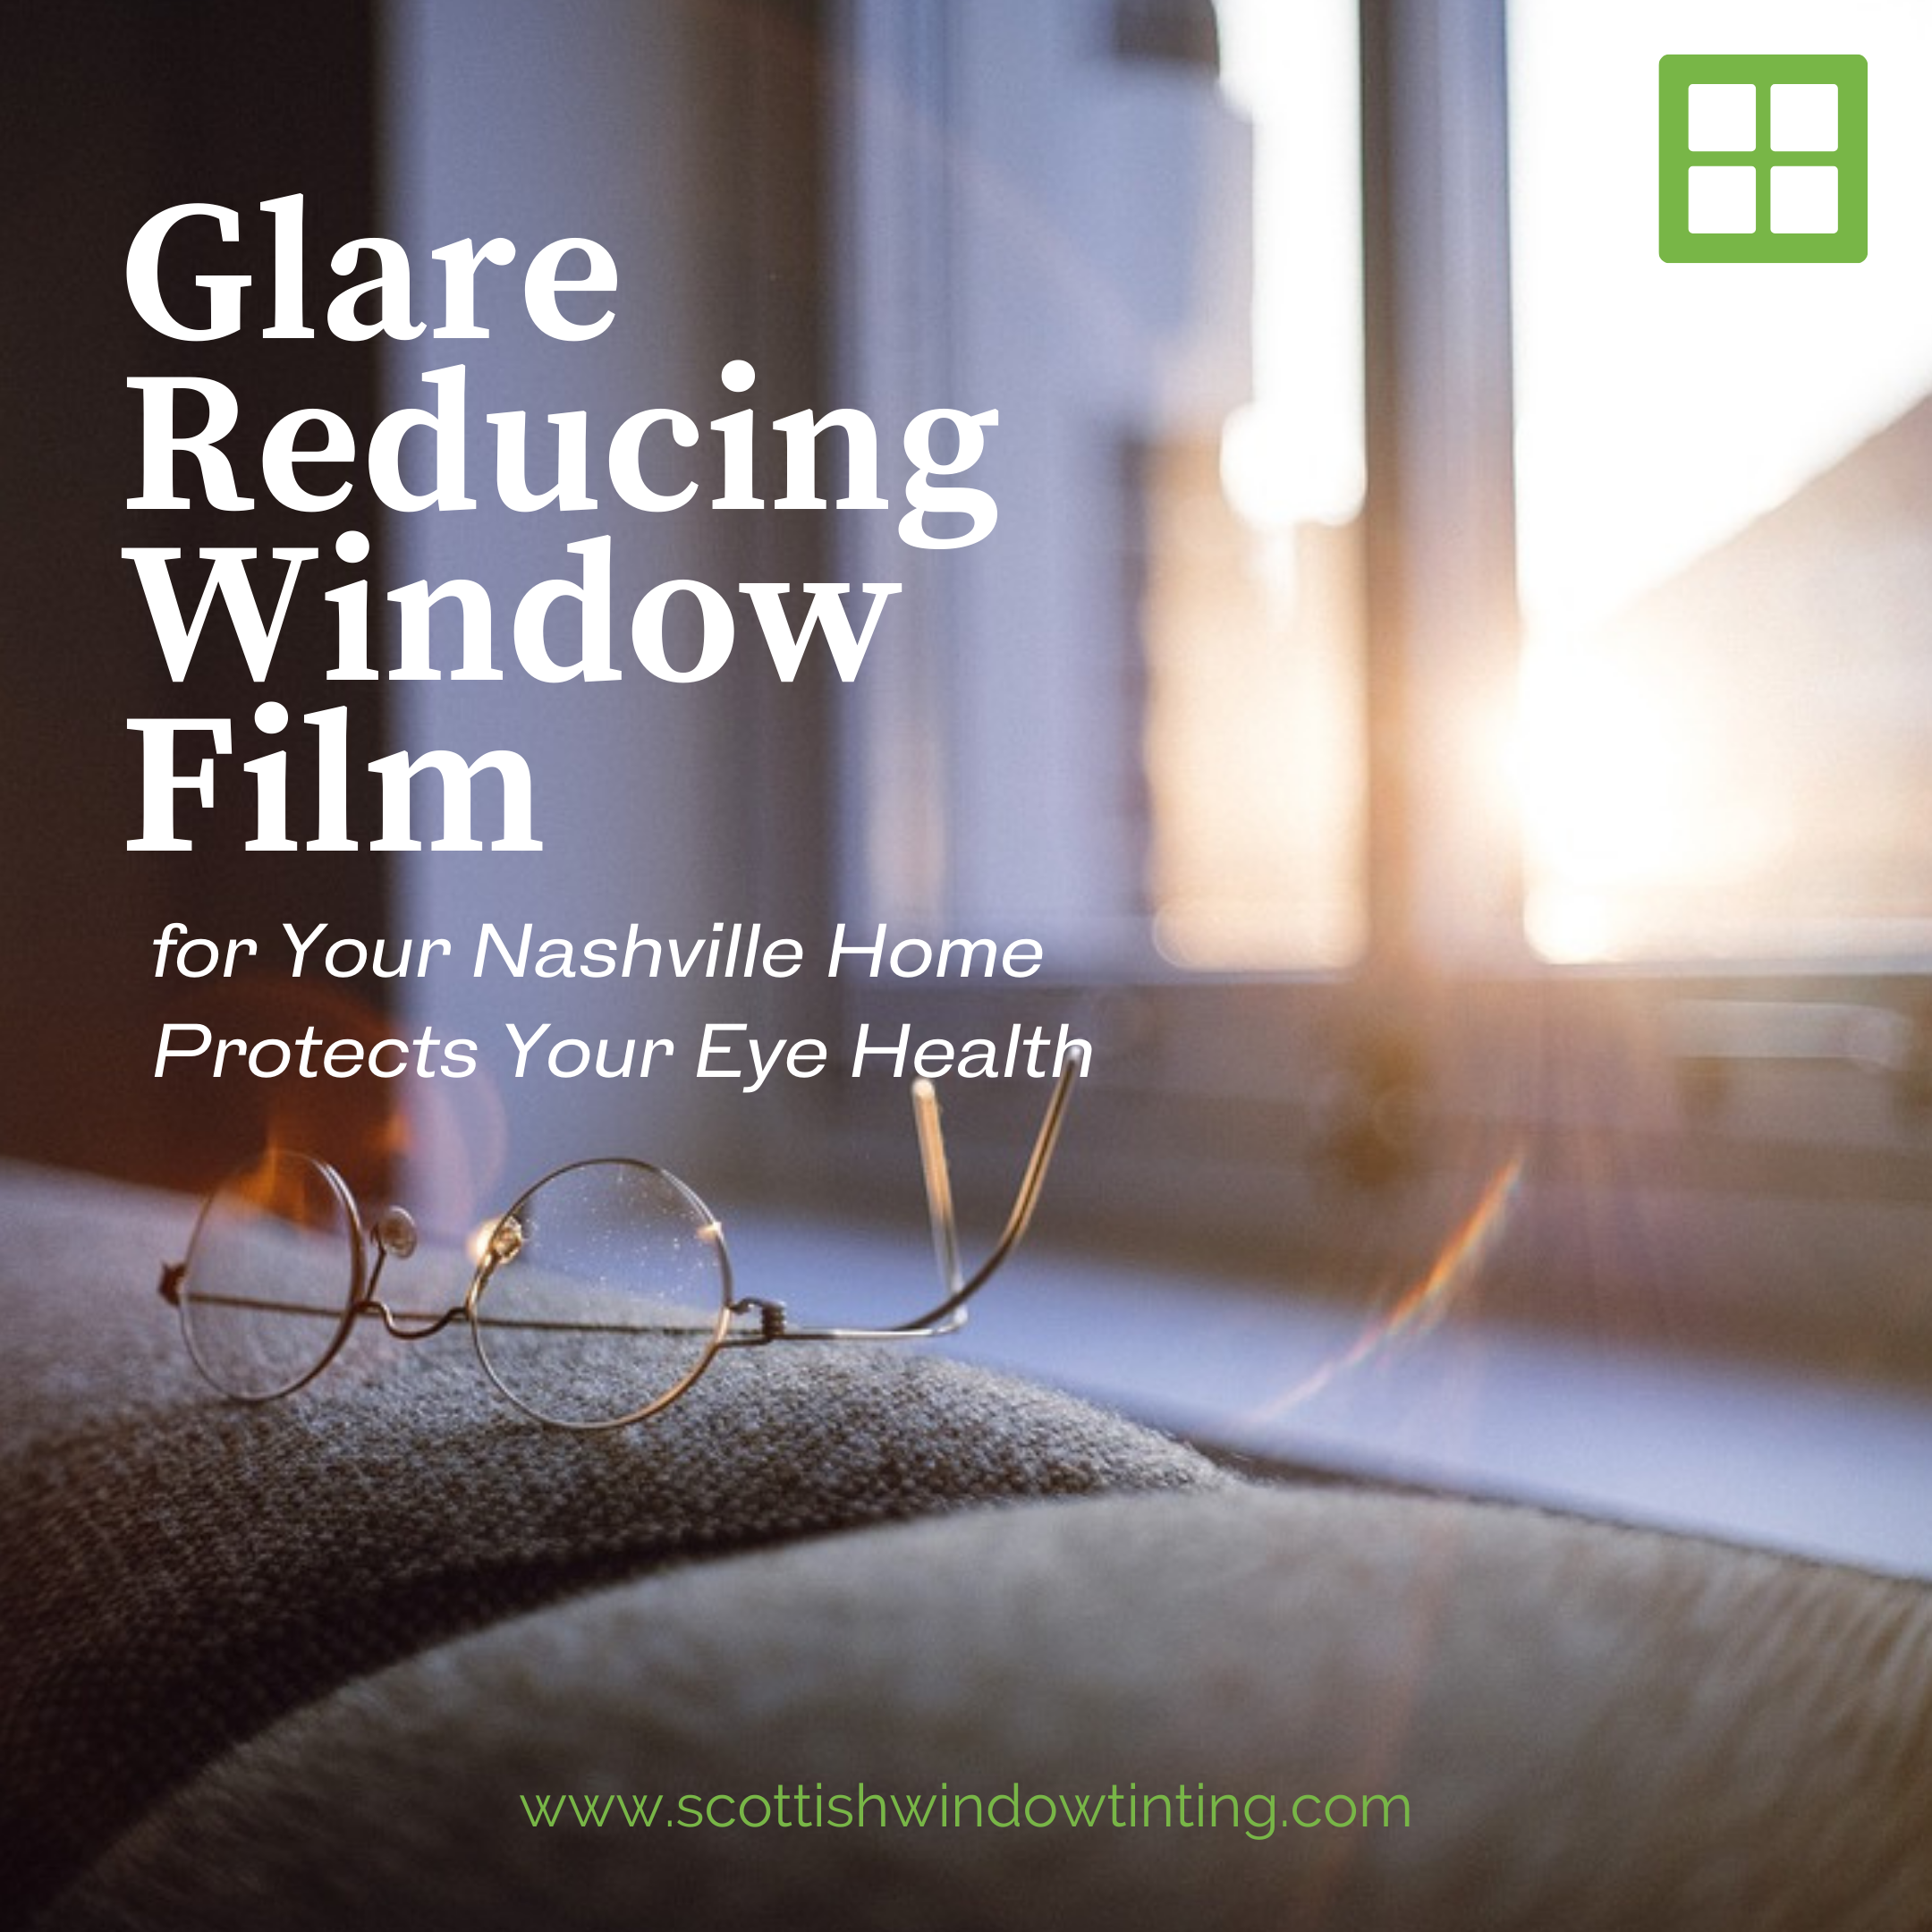 Glare Reducing Window Film for Your Nashville Home Protects Your Eye Health